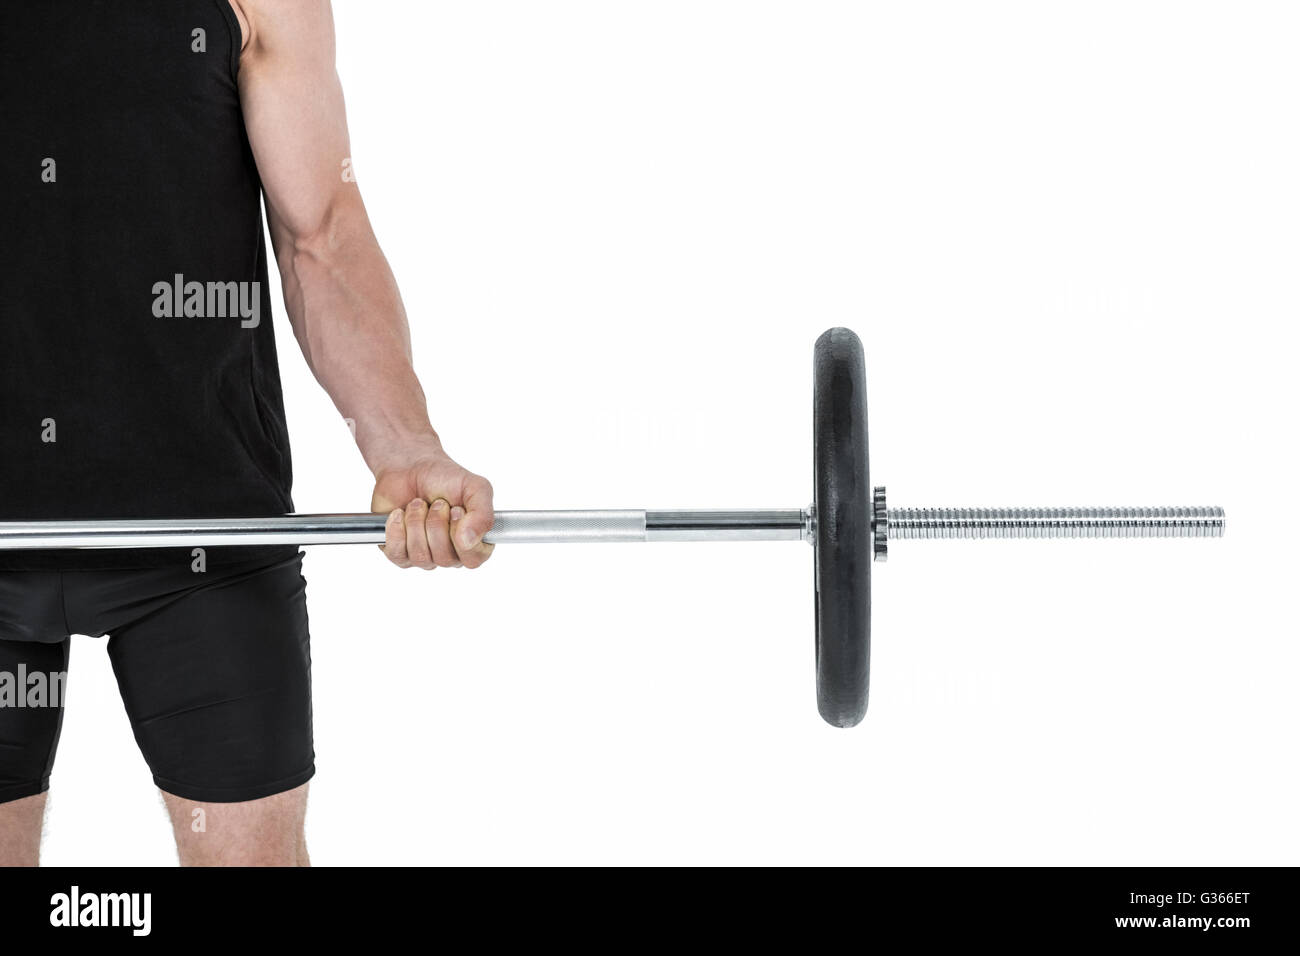 Bodybuilder lifting heavy barbell weights Stock Photo